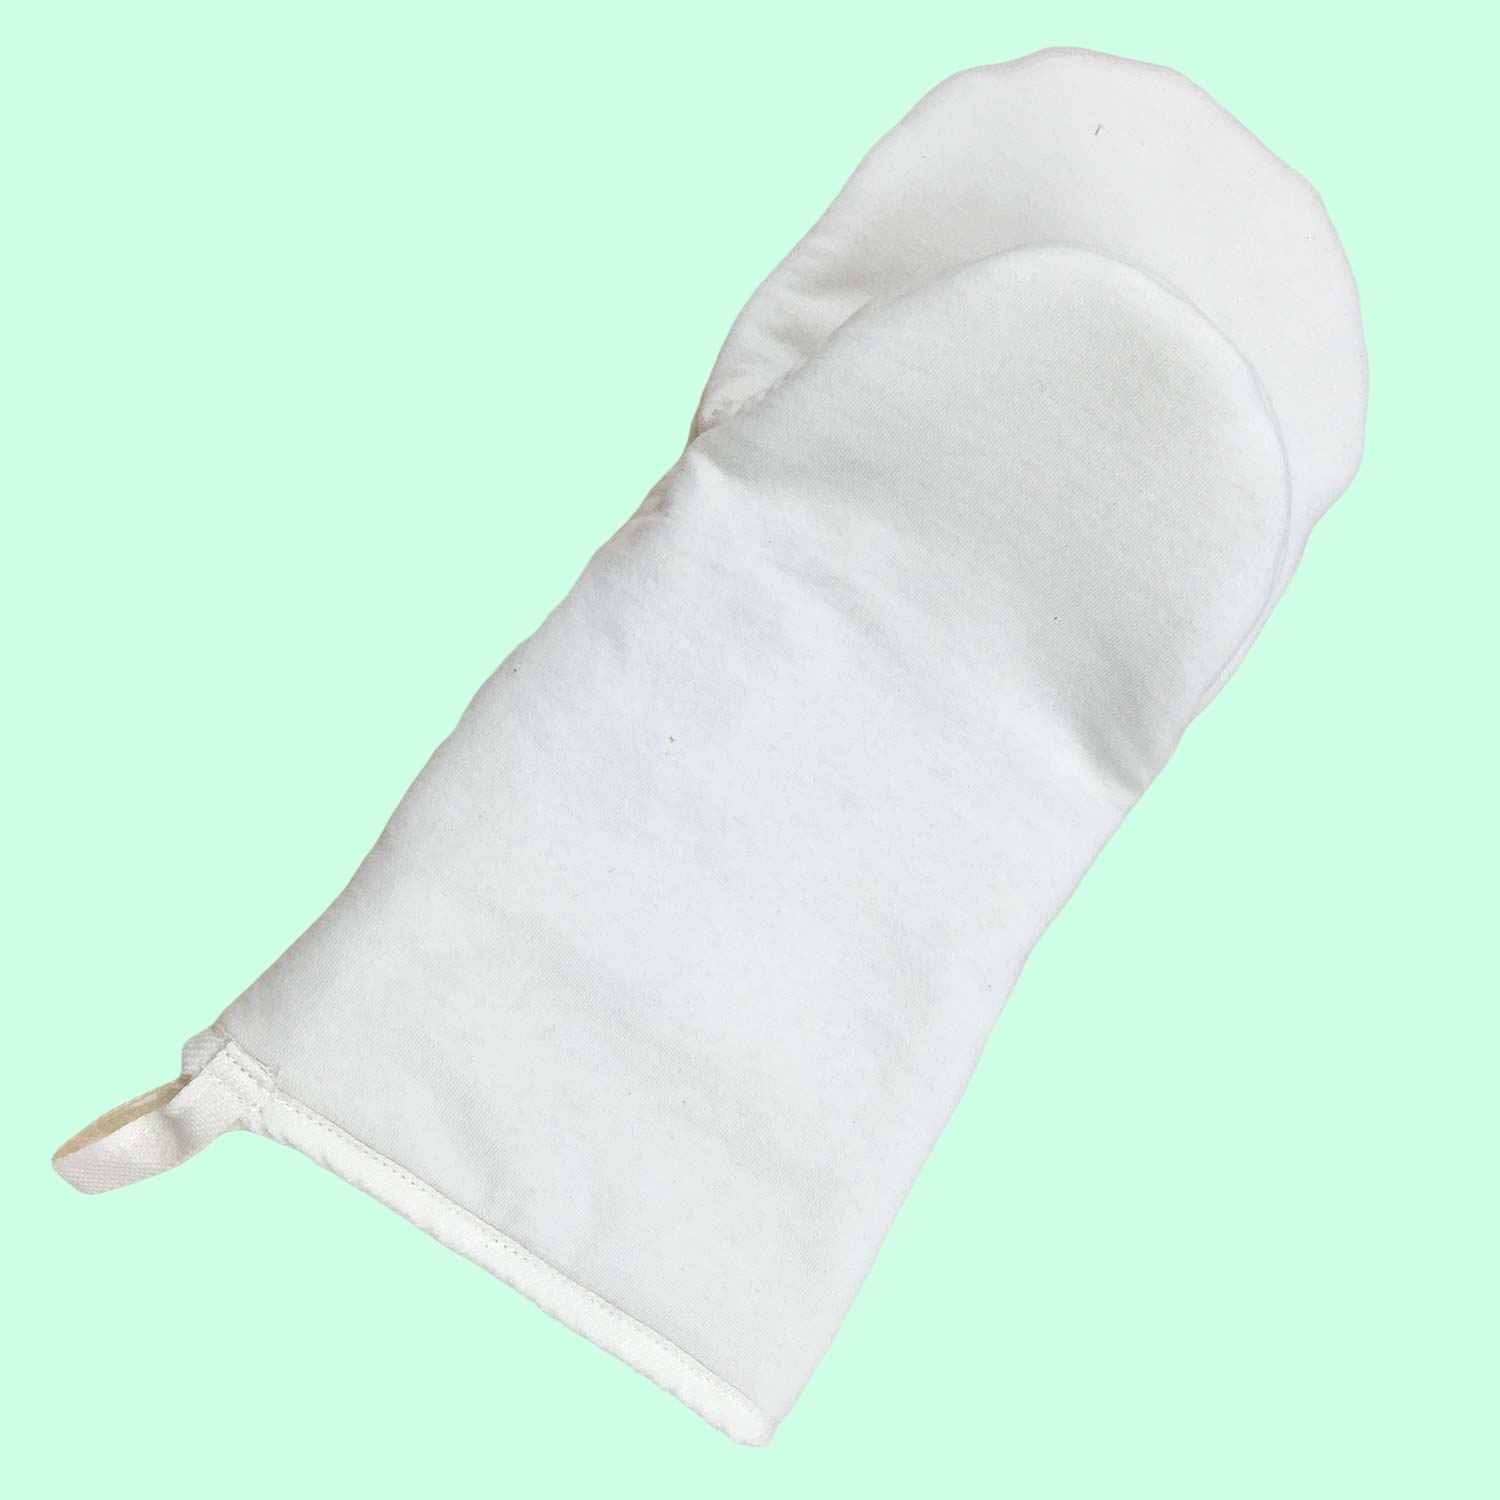 Country Cottons Oven Mitt (Natural)